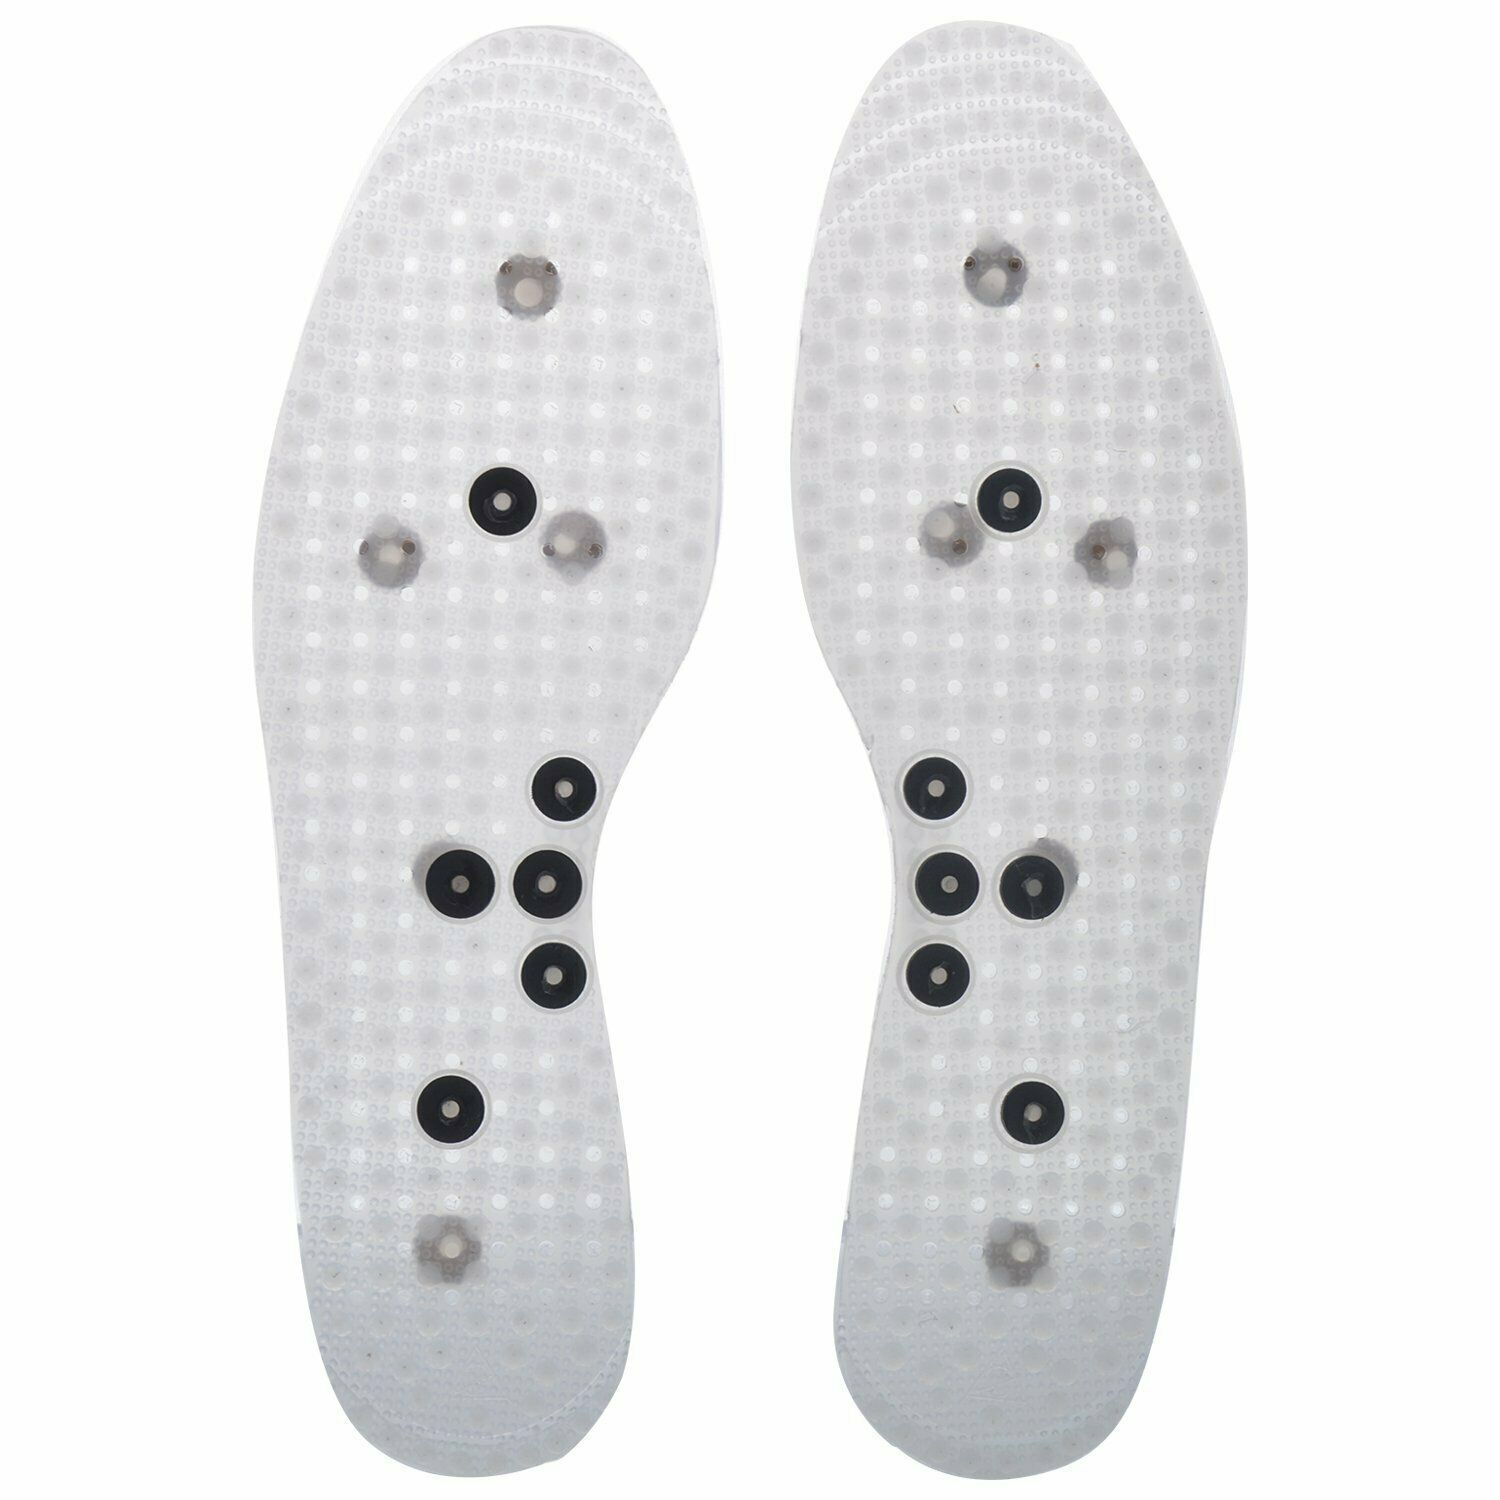 Acupressure Health Care India Unisex Magnetic Shoe Insole Comfort Pads for Foot